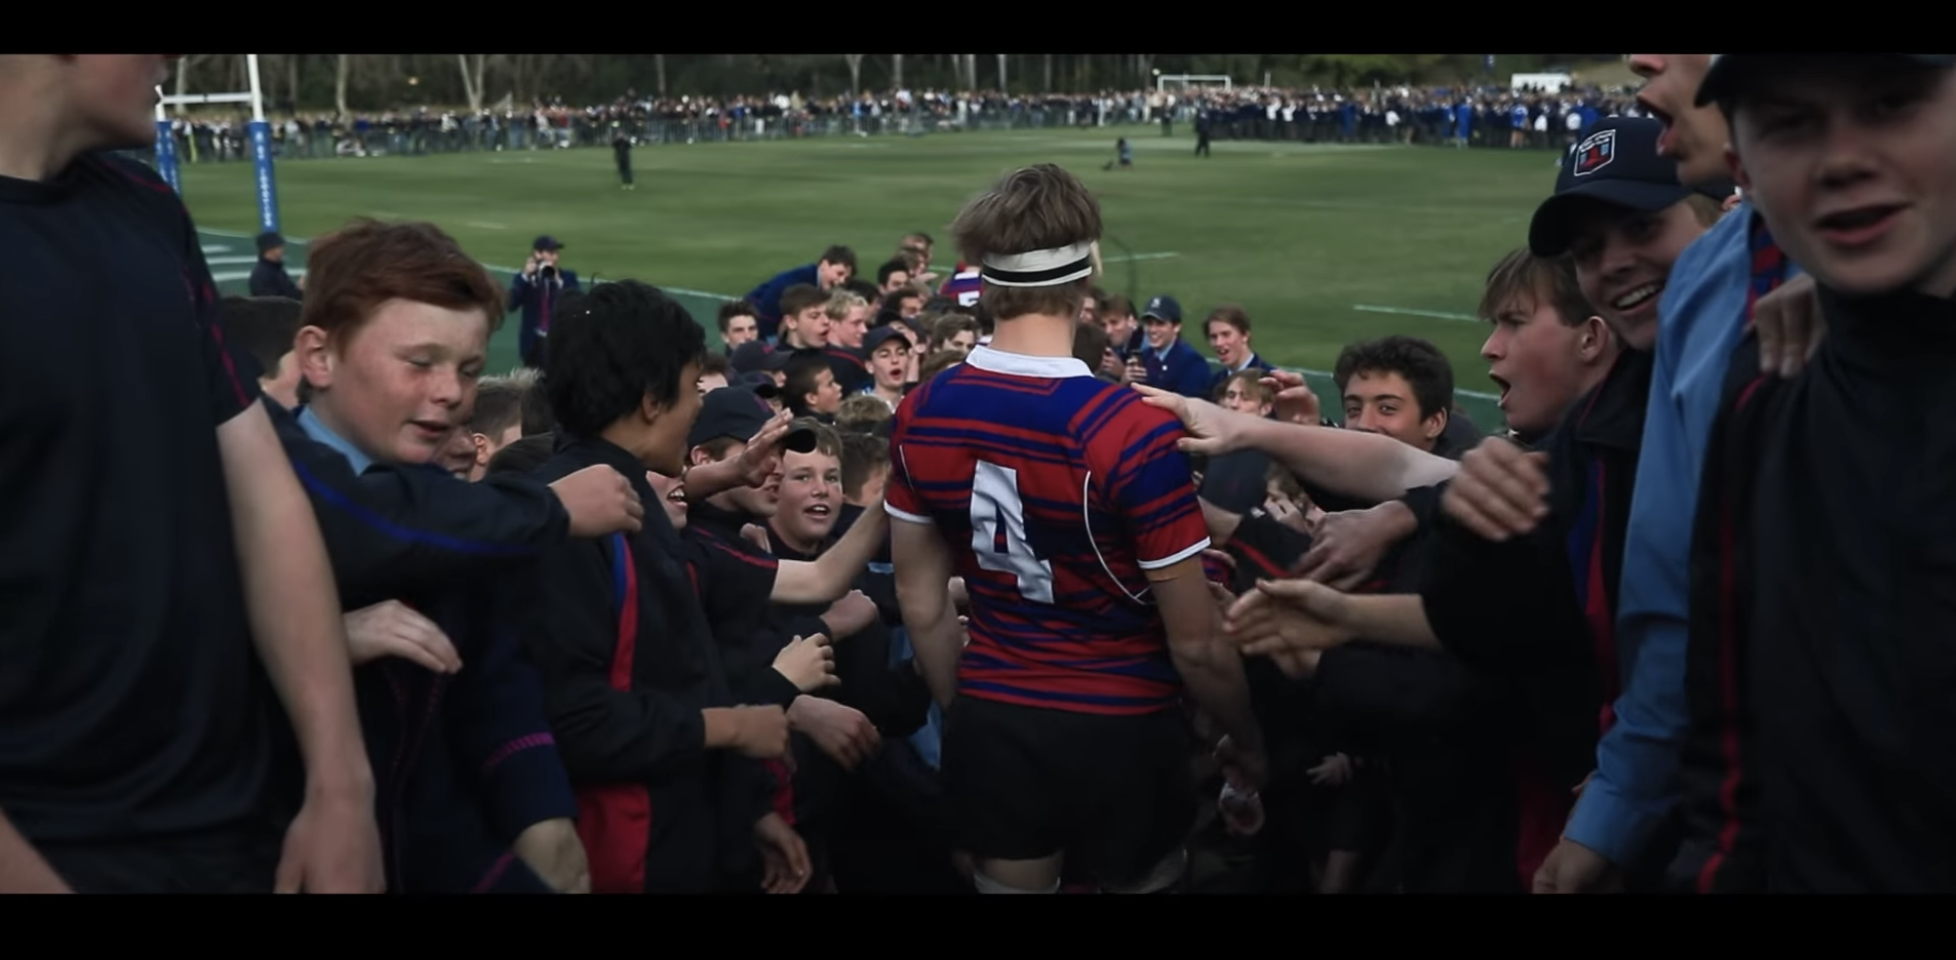 WATCH: An Australian rugby school has made a montage of their season and it's REALLY good